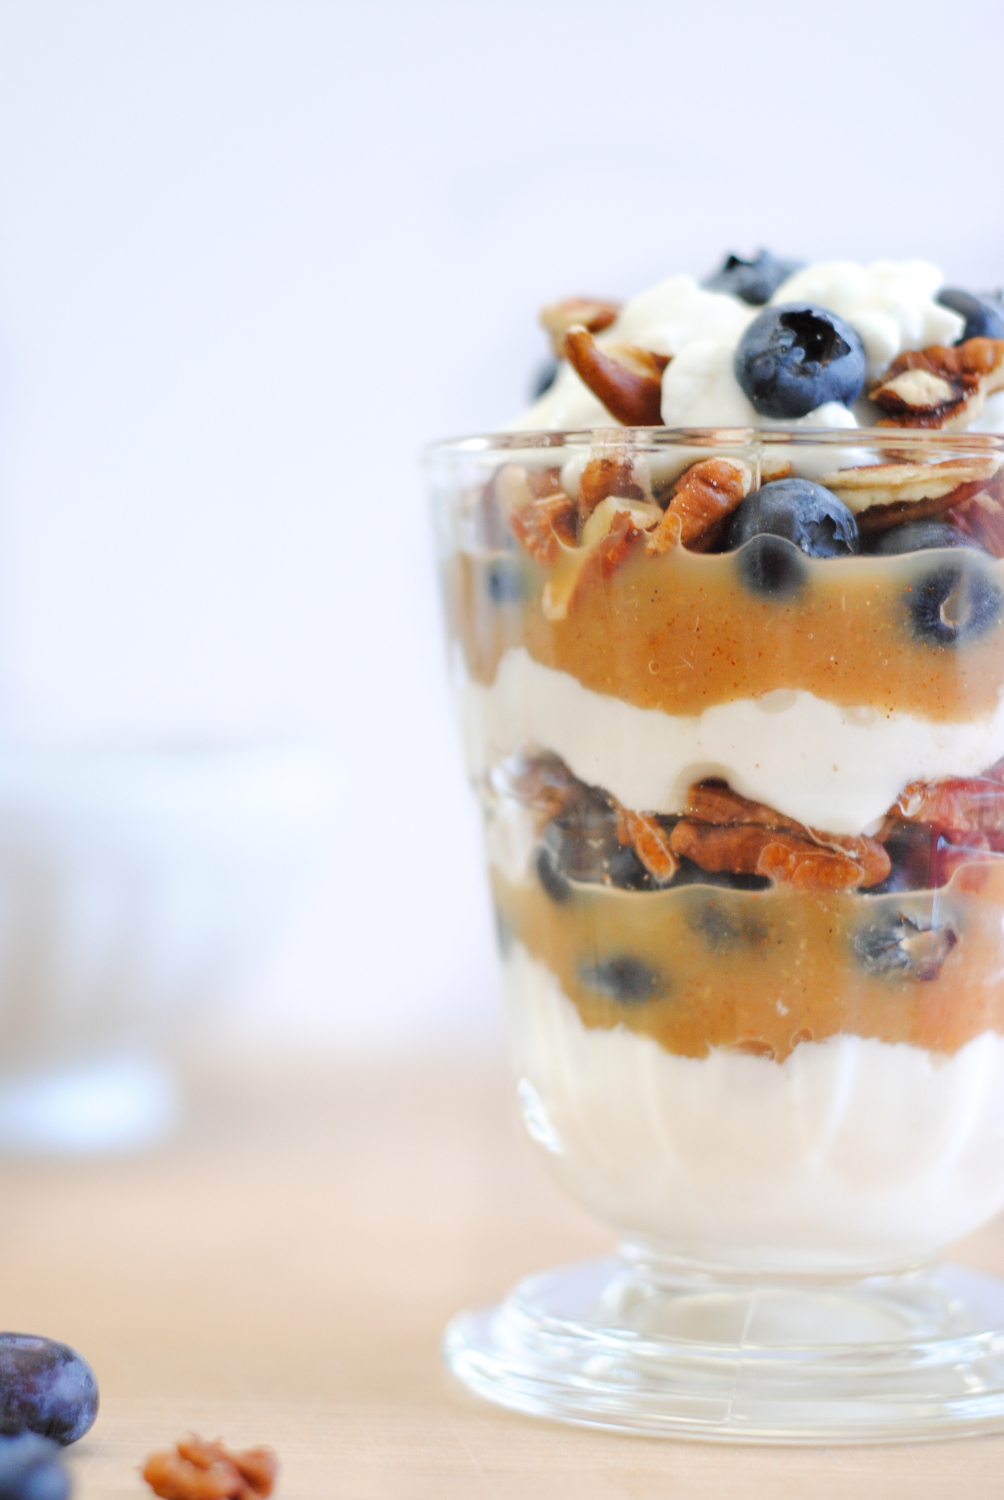 Cottage cheese parfait with spiced applesauce, blueberries, and pecans. Perfect for a healthy, protein-packed, calcium-rich breakfast, lunch, snack or dessert. Seriously TO DIE FOR!!